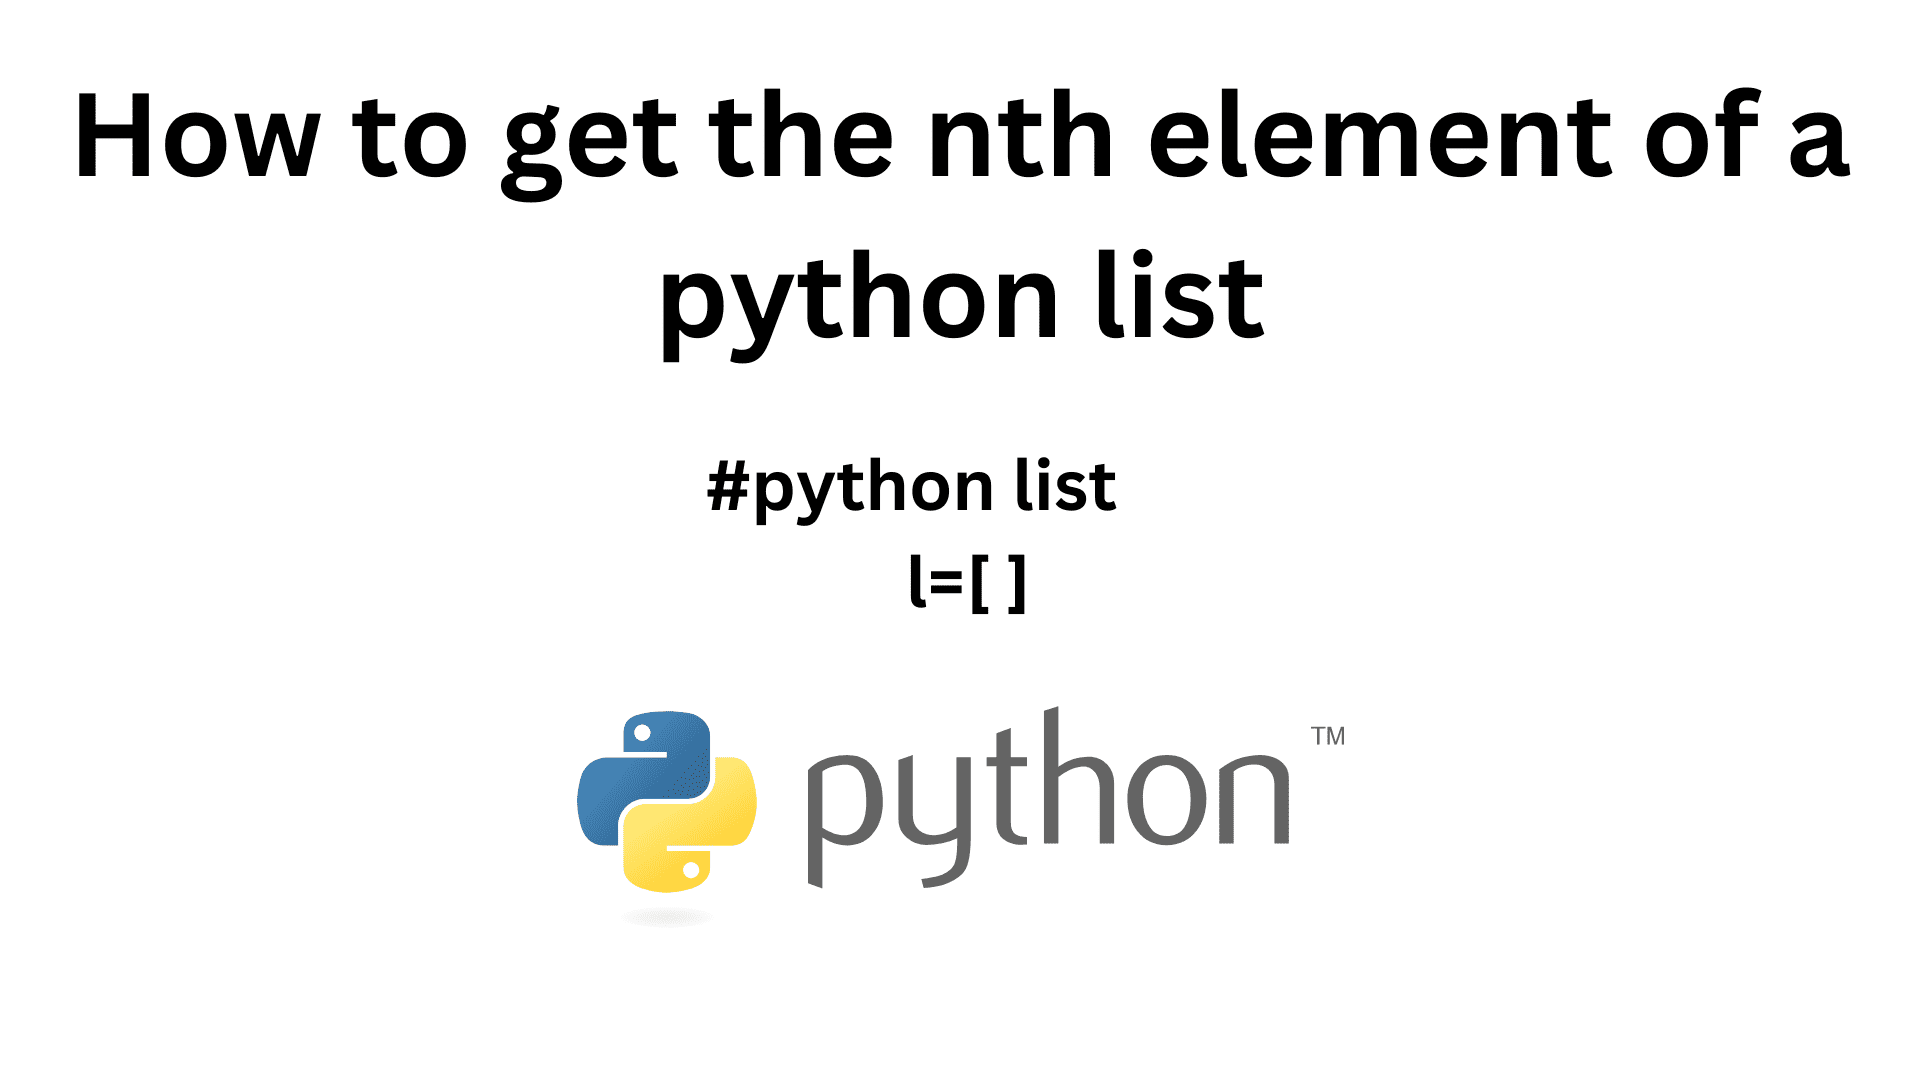 How to get the nth element of a python list details